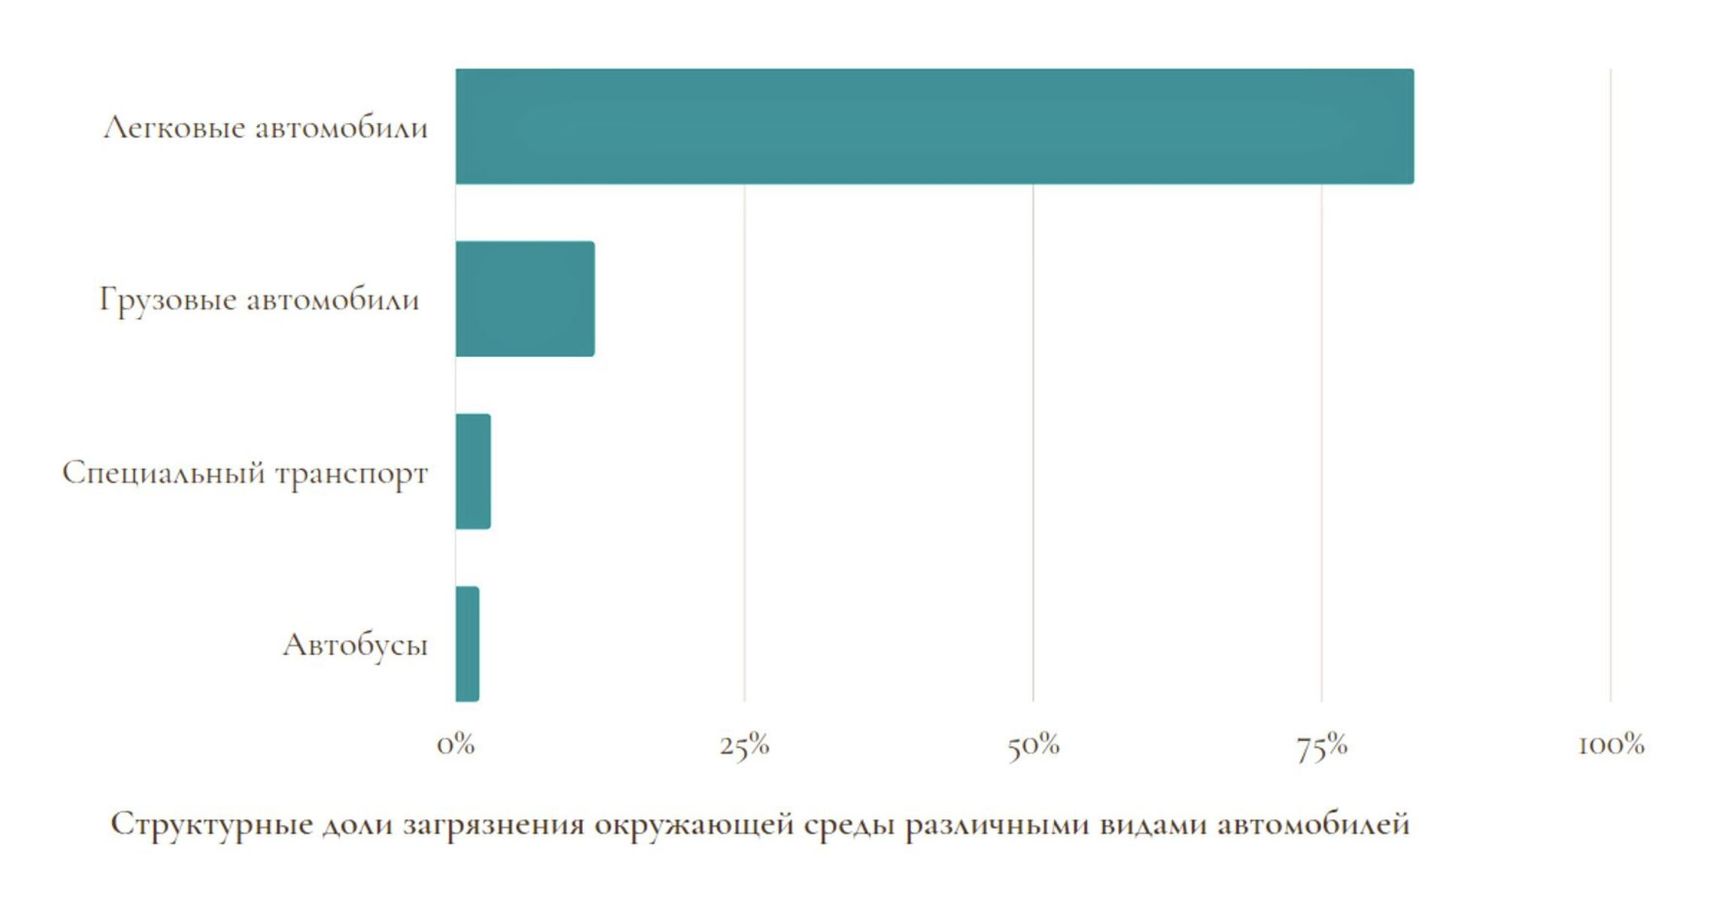 In cities, cars account for 83% of pollution, trucks for 12%, special vehicles for 2.8% and buses only for 2.2%. Source: “Comparative Analysis of the Toxicity of Automobile Exhaust Gases and Ways to Reduce It”, N. Karimkhojaev, M. Z. Numonov, 2020 